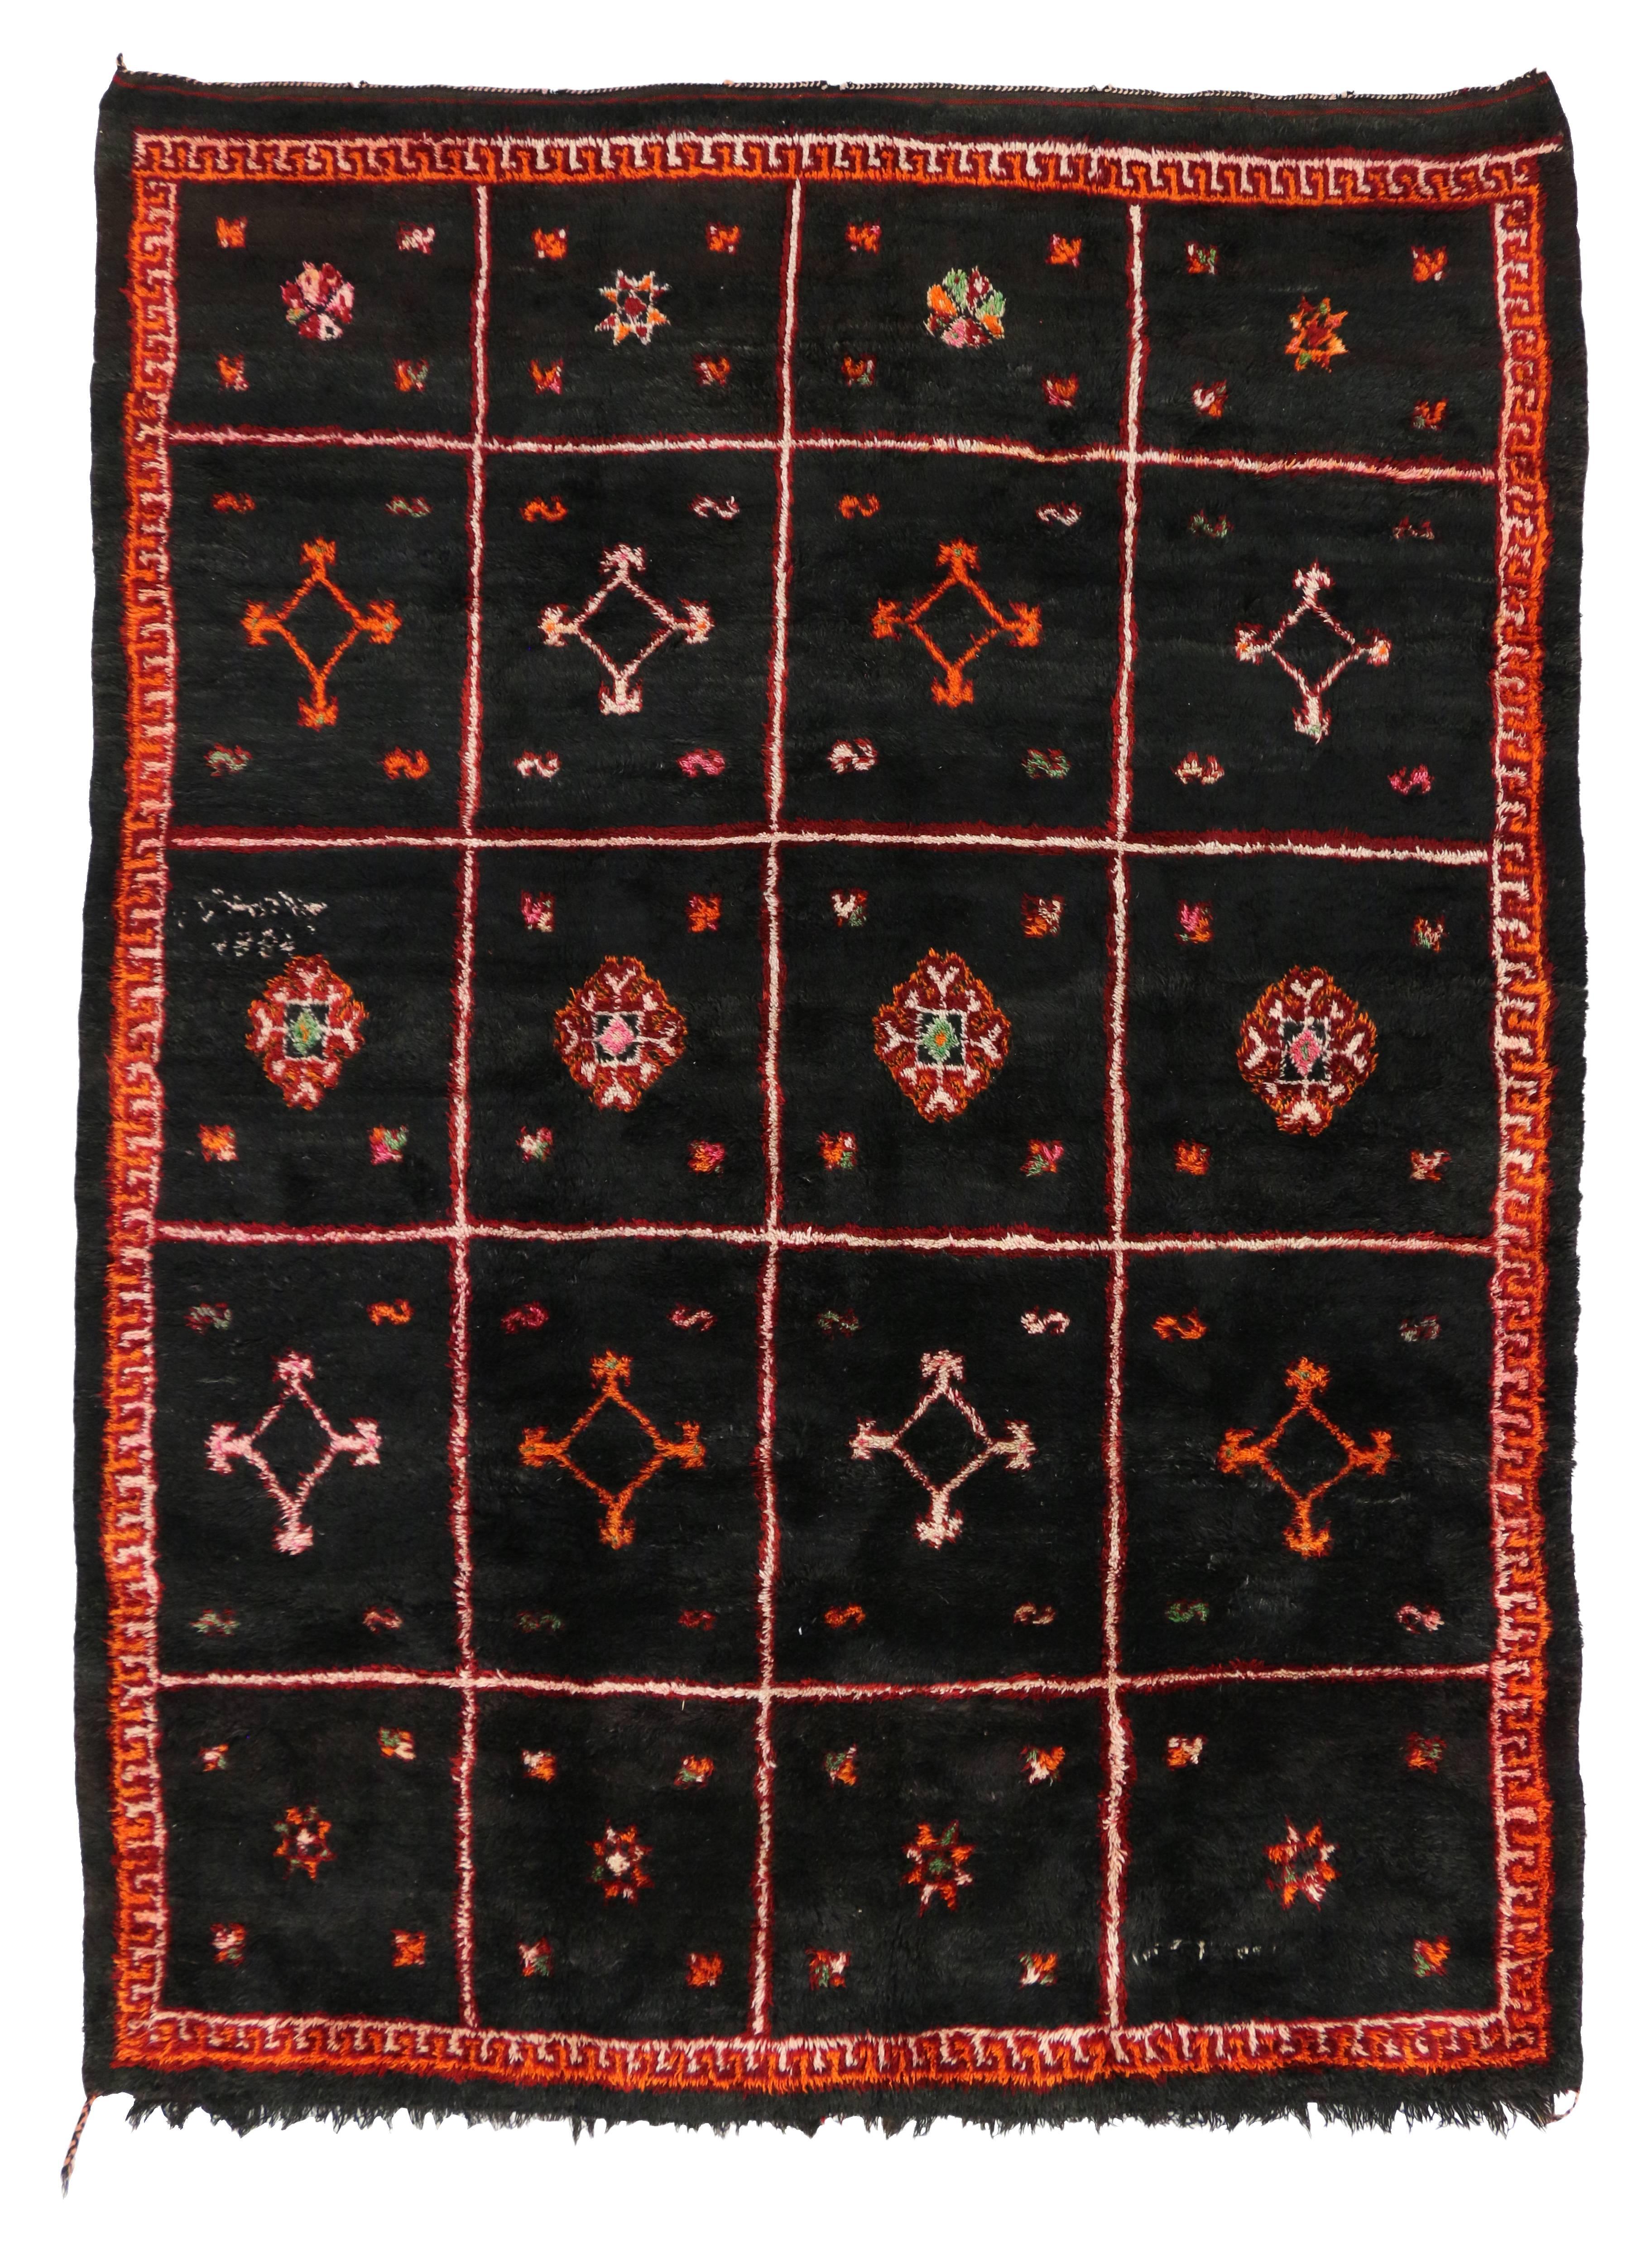 20th Century Vintage Moroccan Rug, Black Moroccan Area Rug with Tribal Style